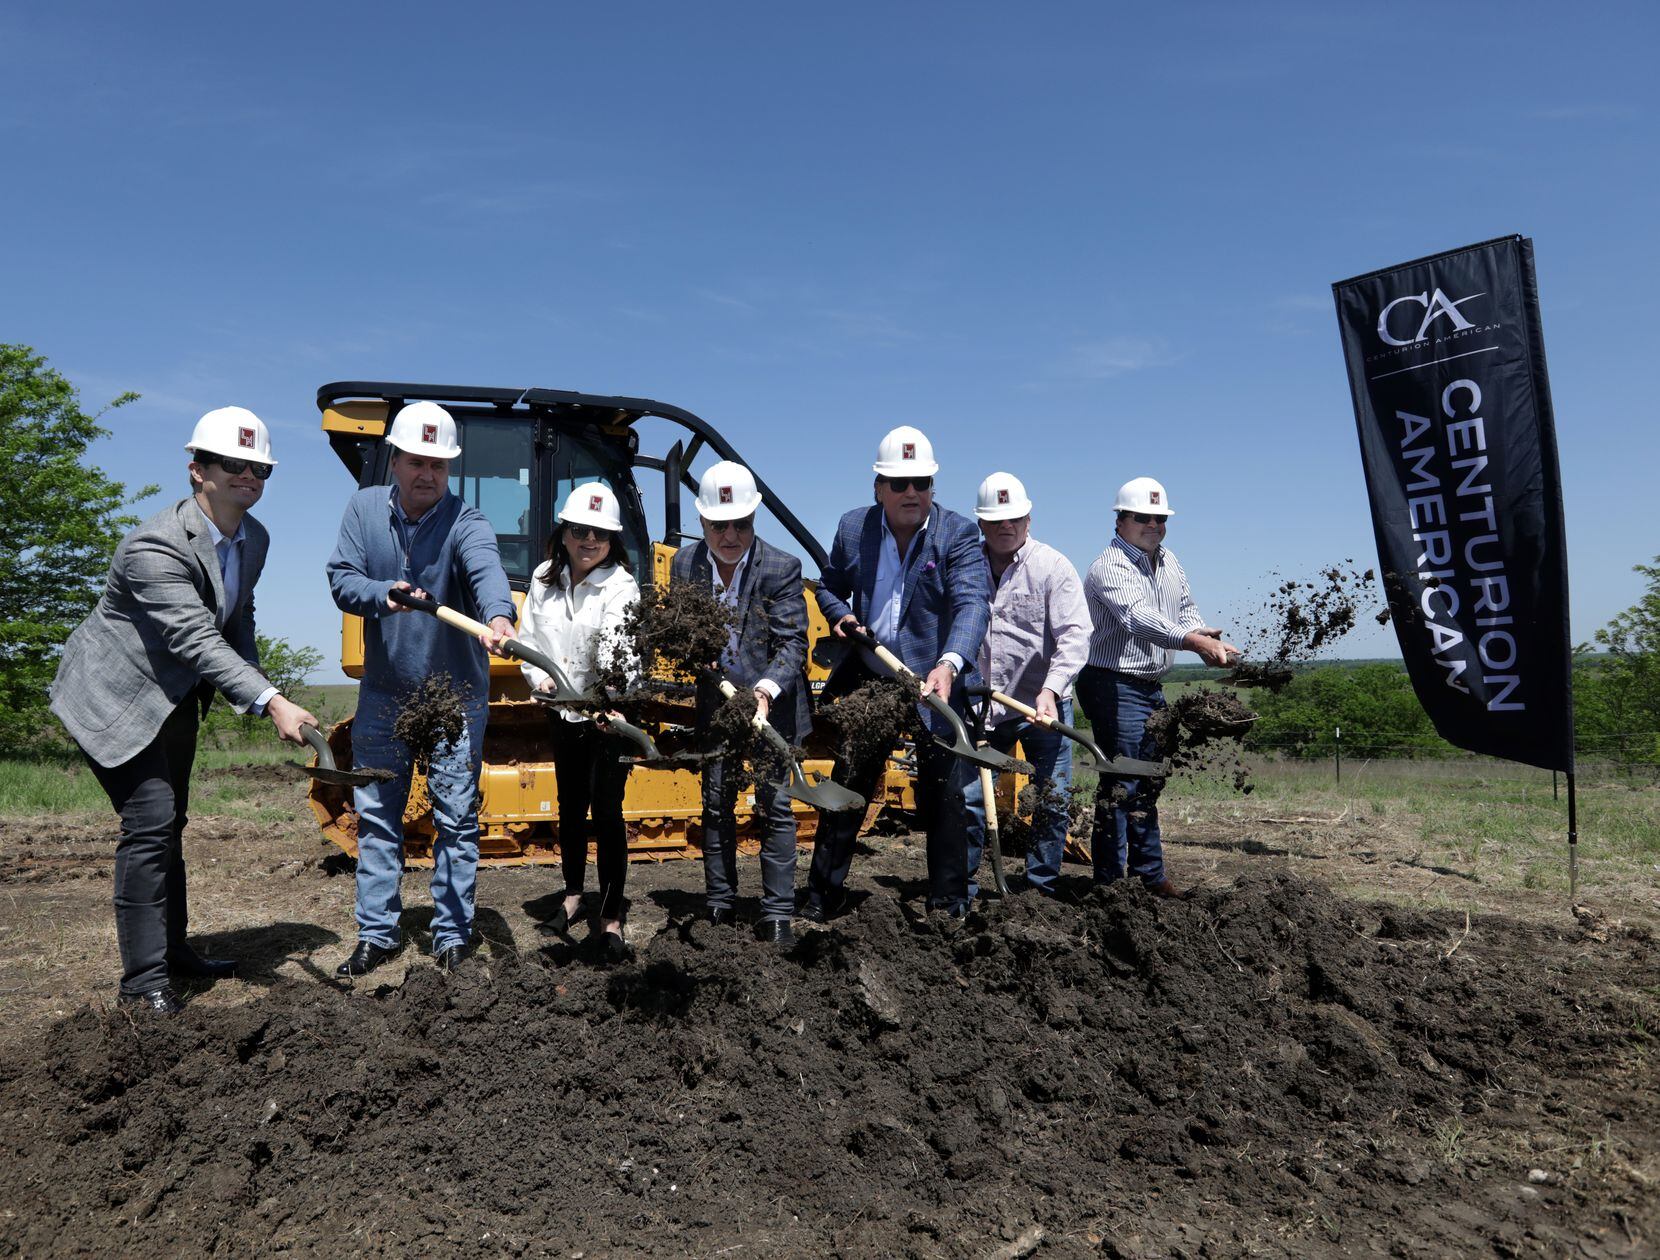 VIPs participate in a ceremonial groundbreaking at the new Centurion American development in...